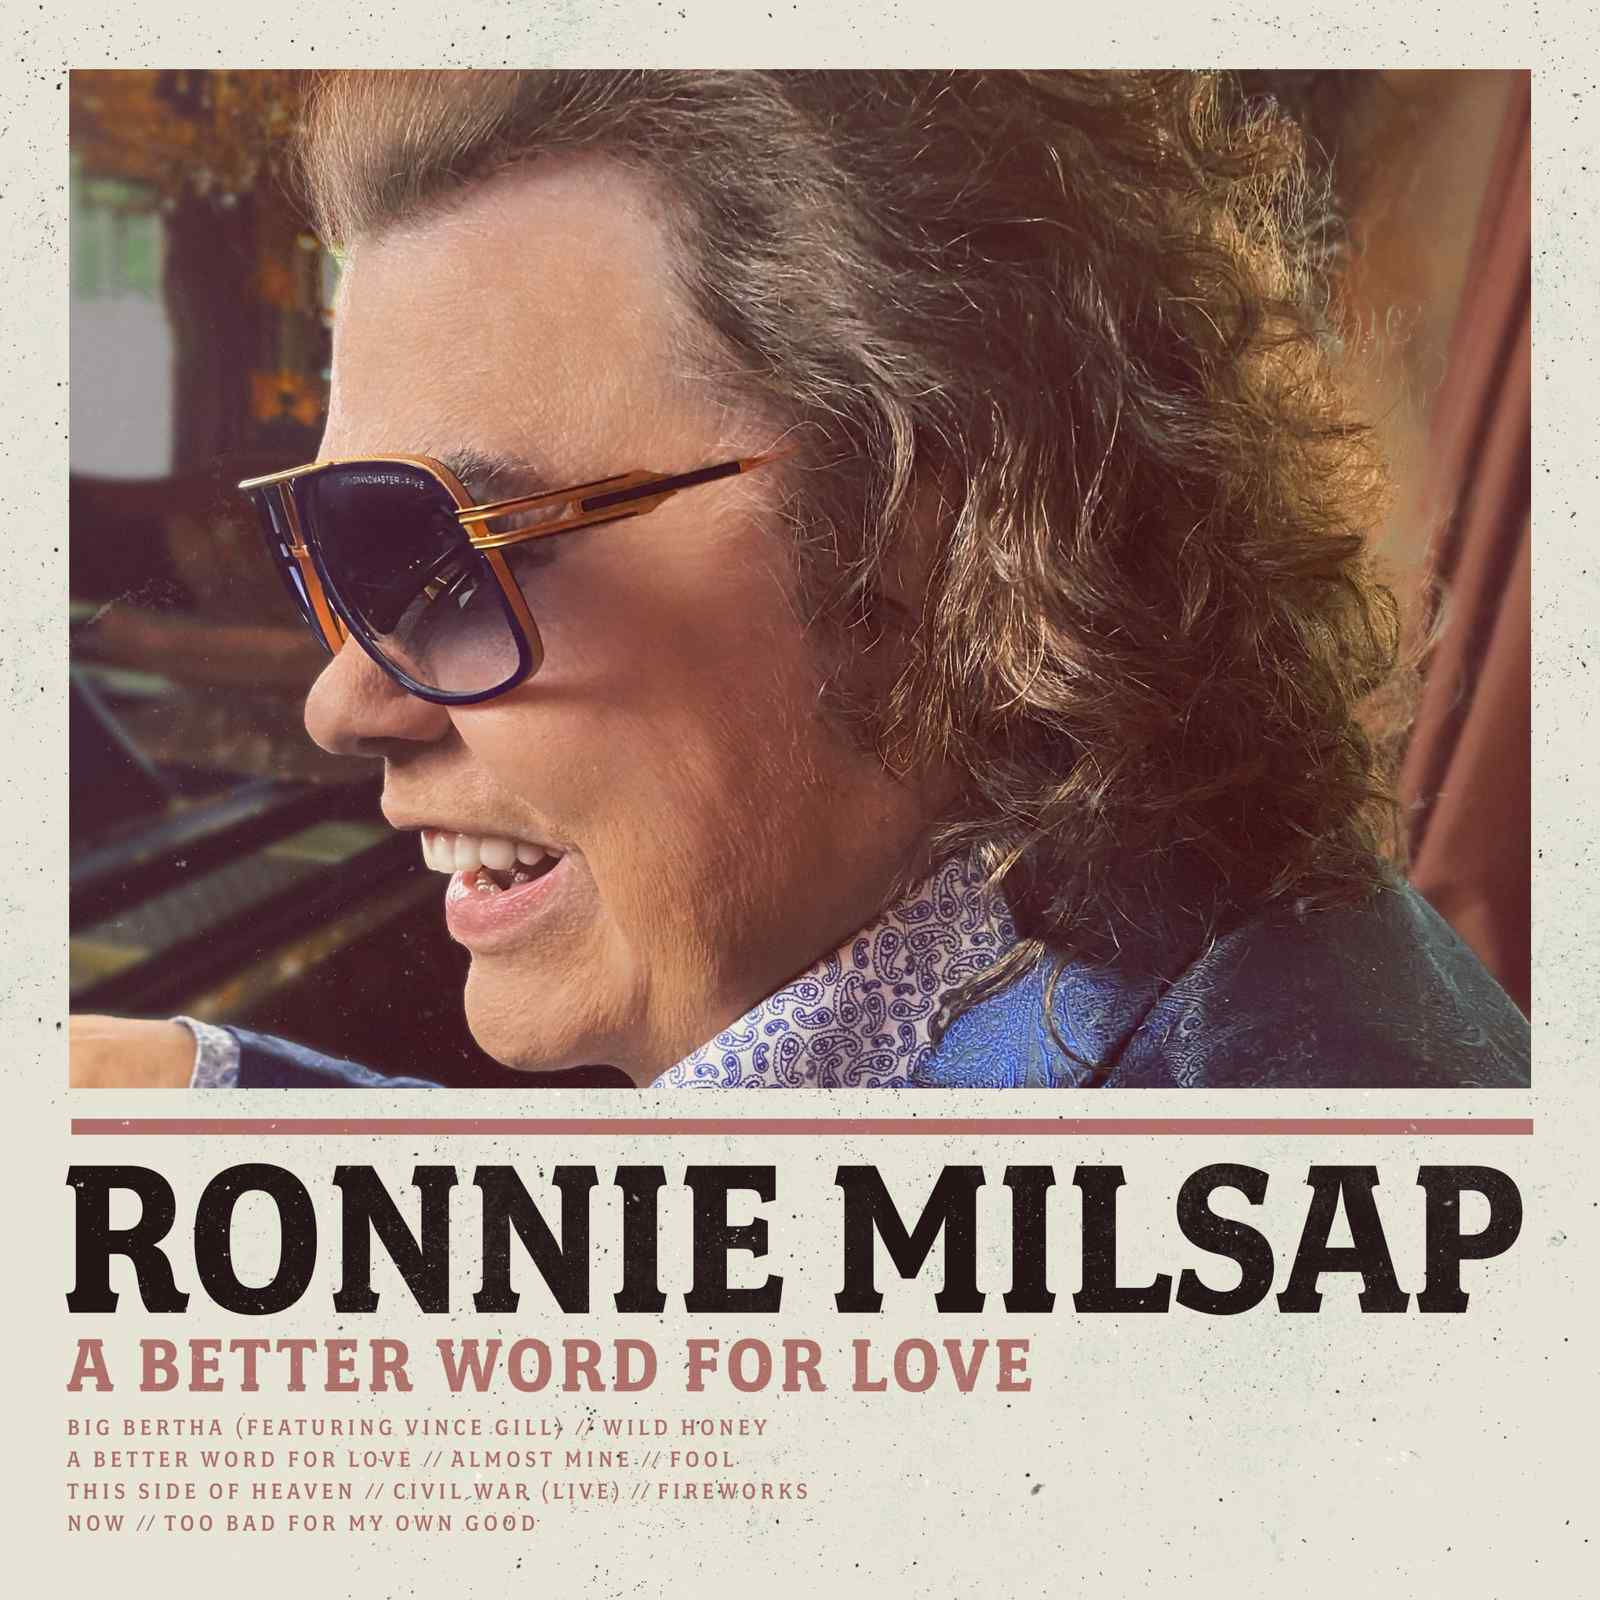 A Better Word For Love by Ronnie Milsap